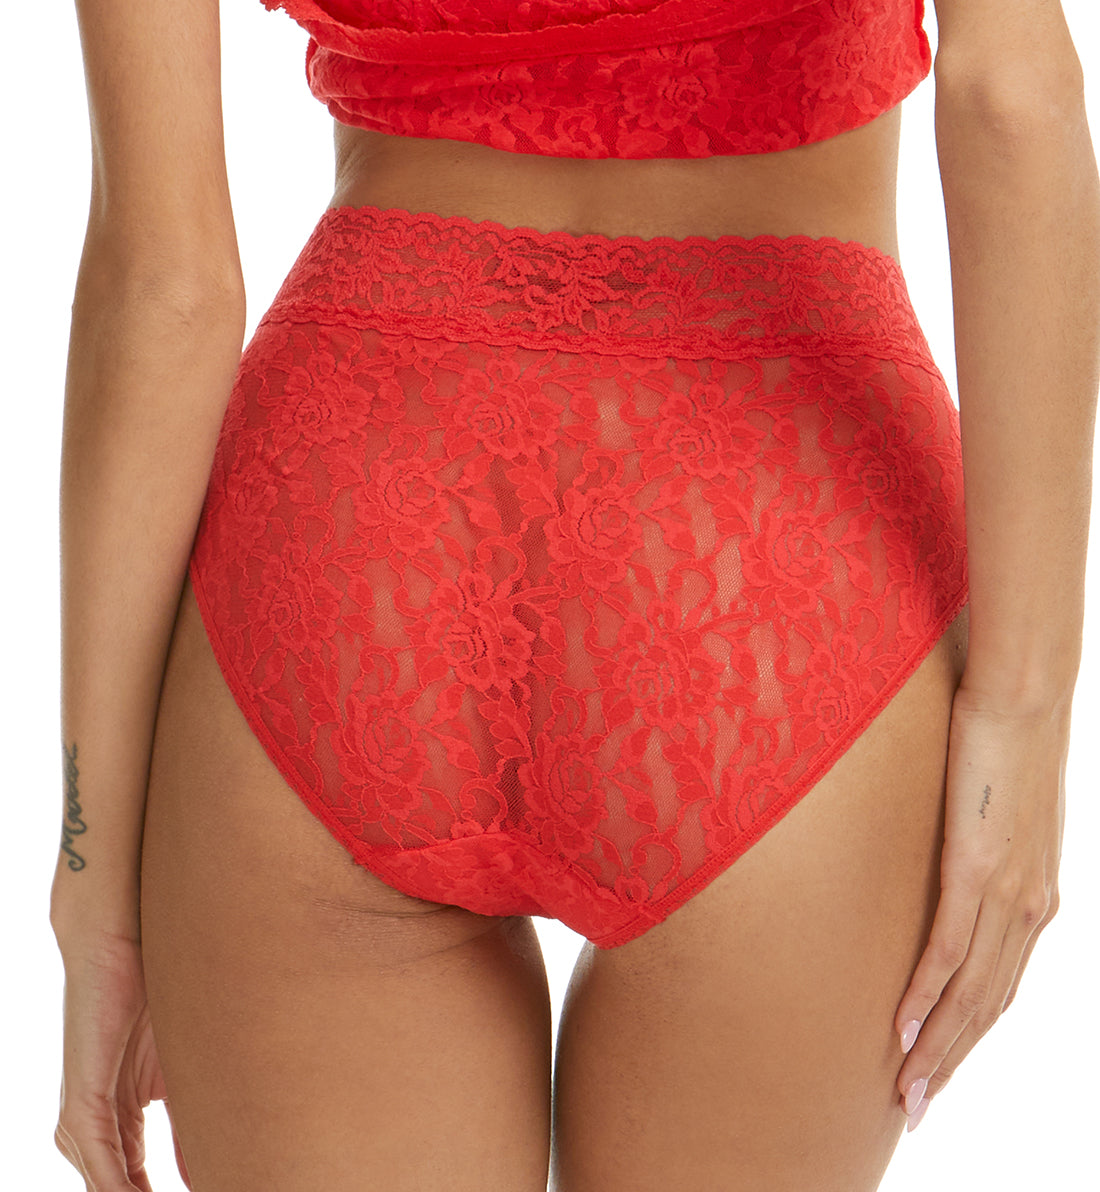 Hanky Panky Signature Lace French Brief (461),XS,Deep Sea Coral - Deep Sea Coral,XS